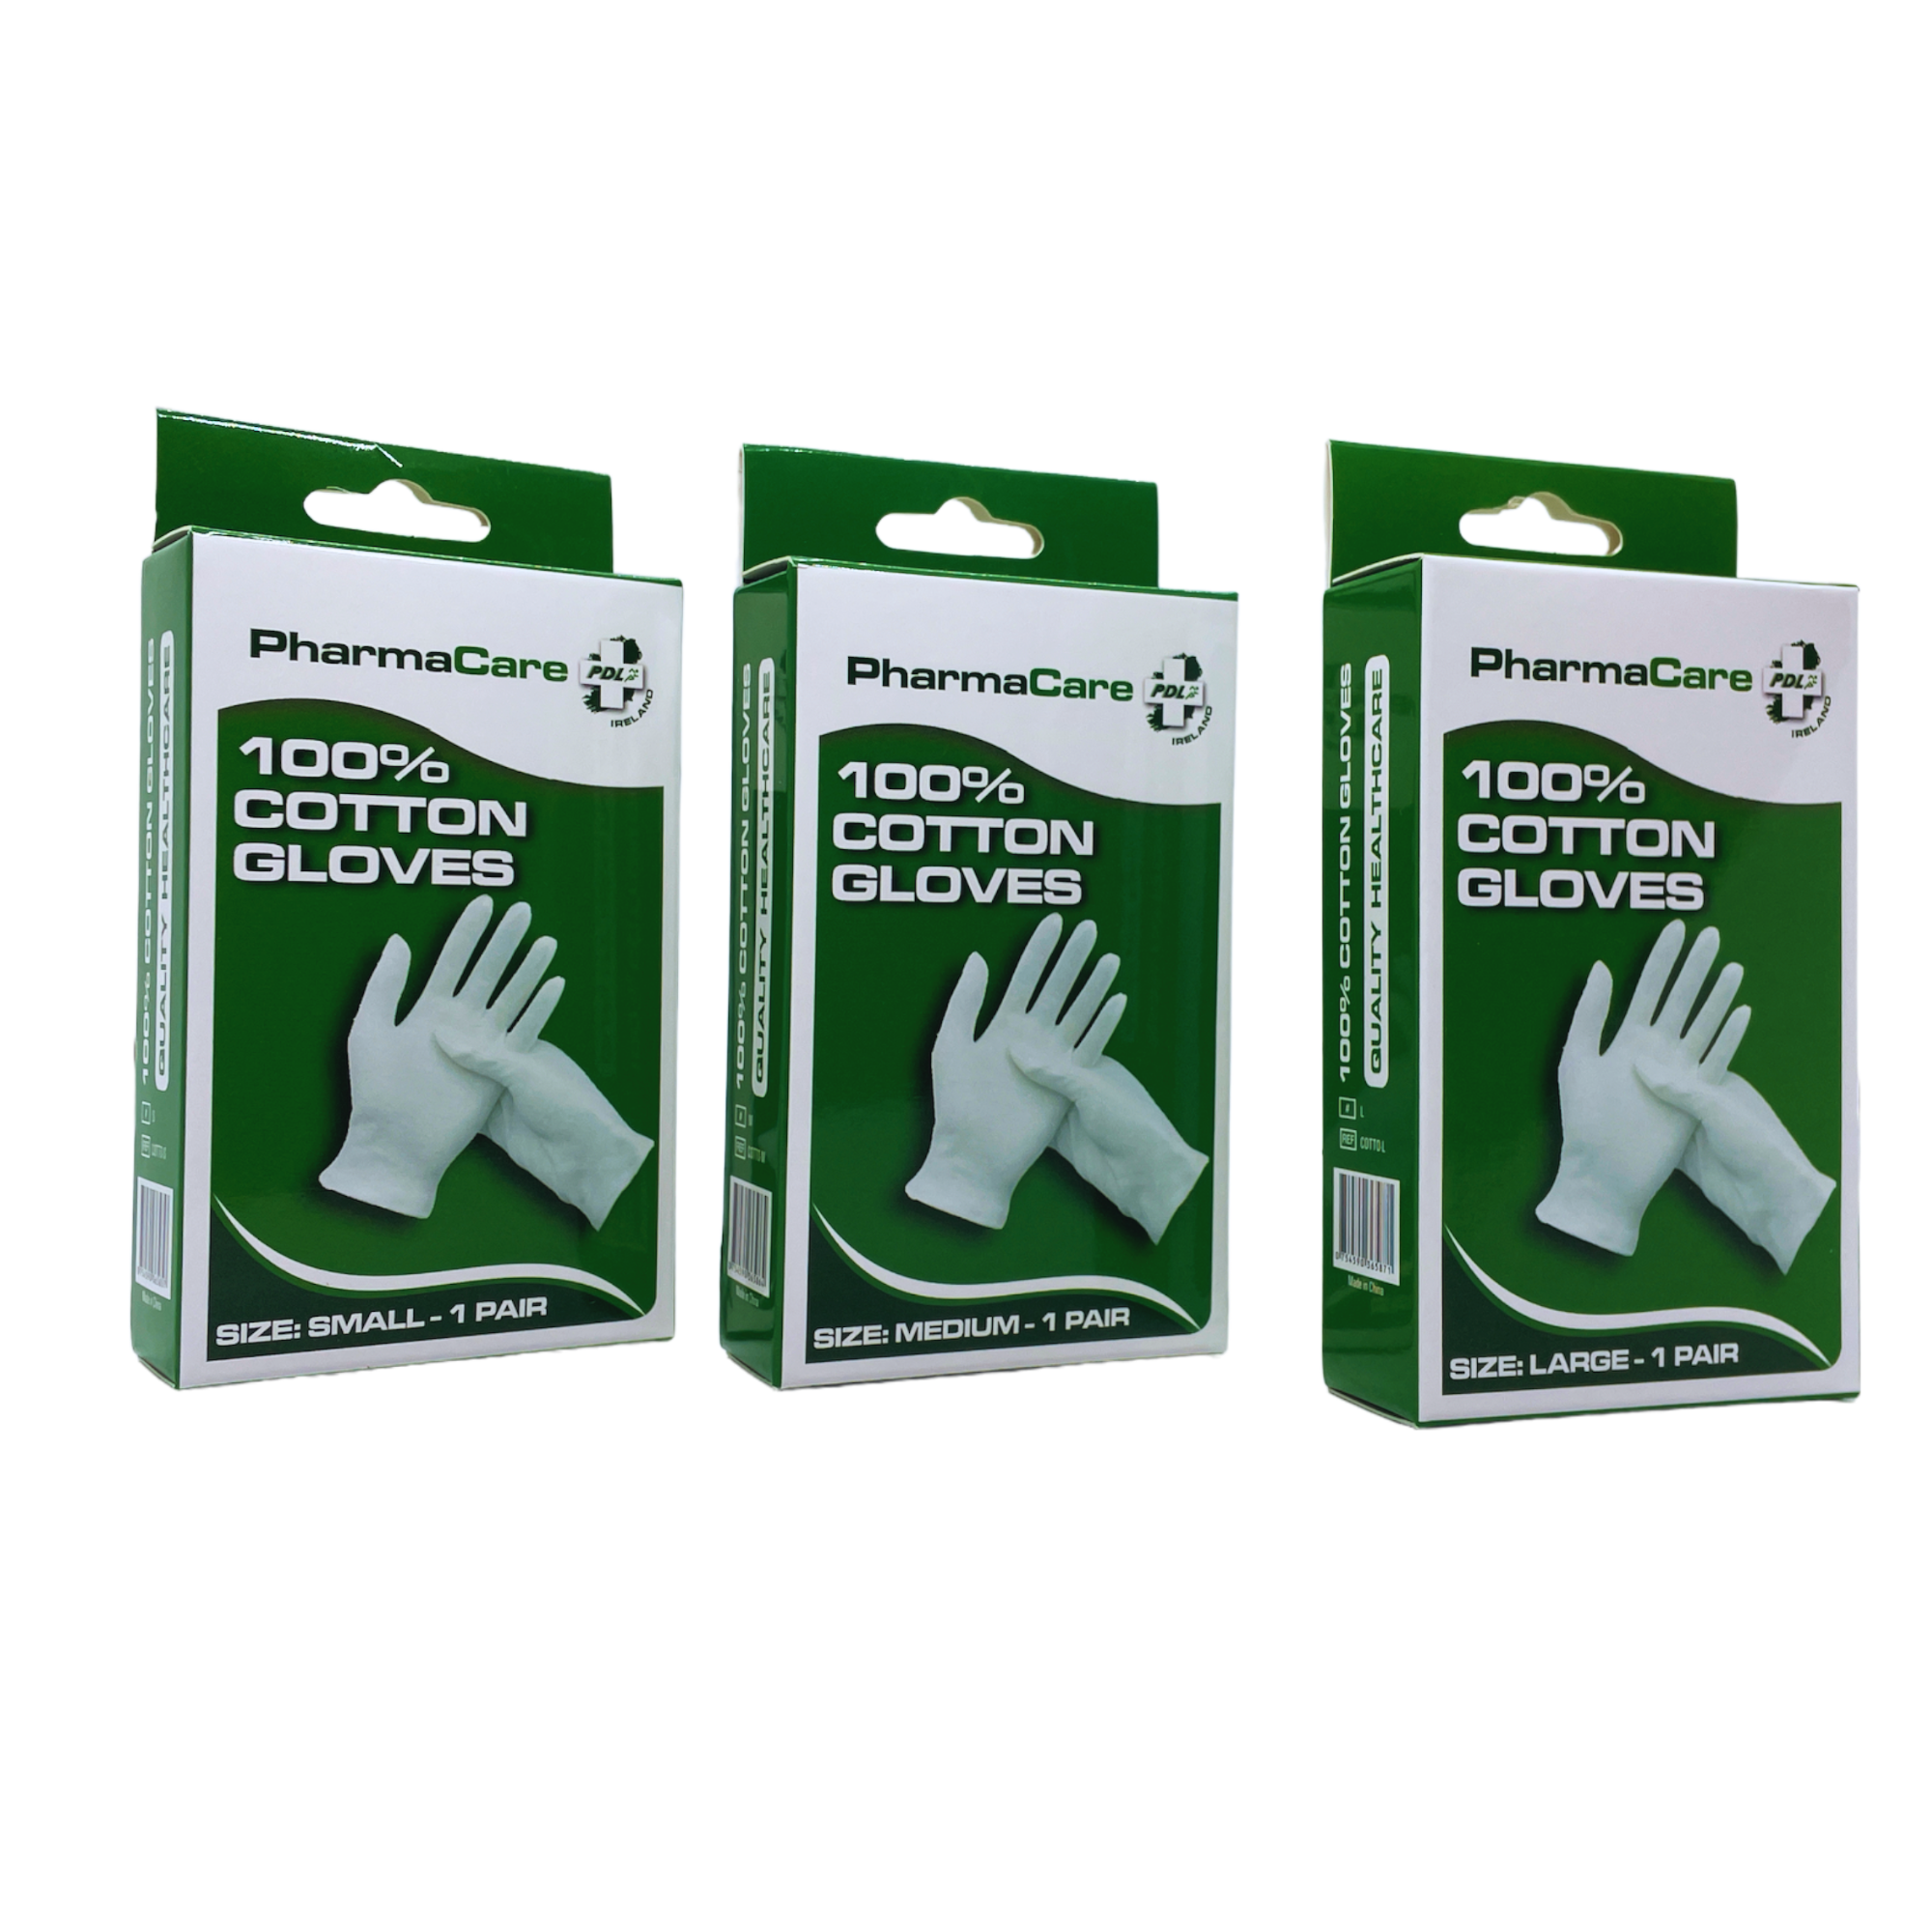 PharmaCare Cotton Gloves